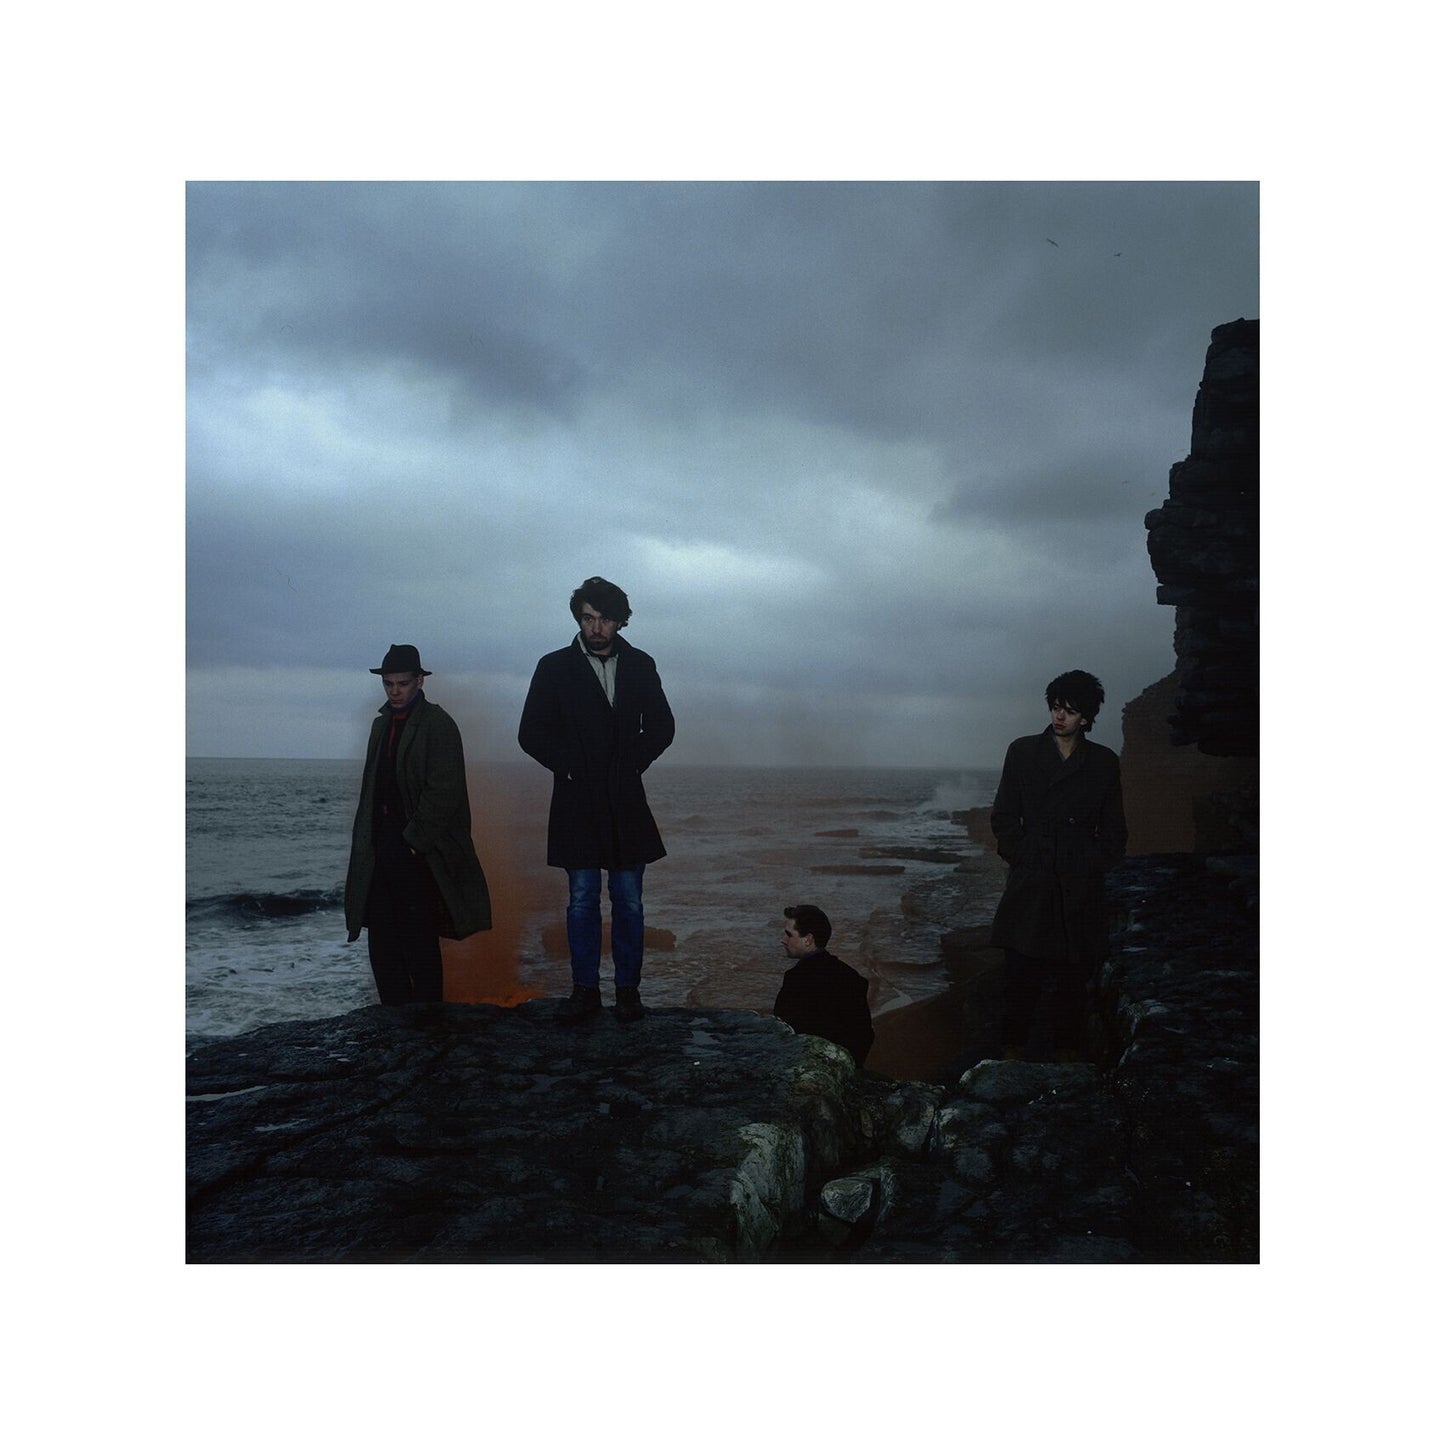 Echo and the Bunnymen - 'Heaven Up Here' LP Album Cover Photoshoot, Wales, UK, 1984 Print 9